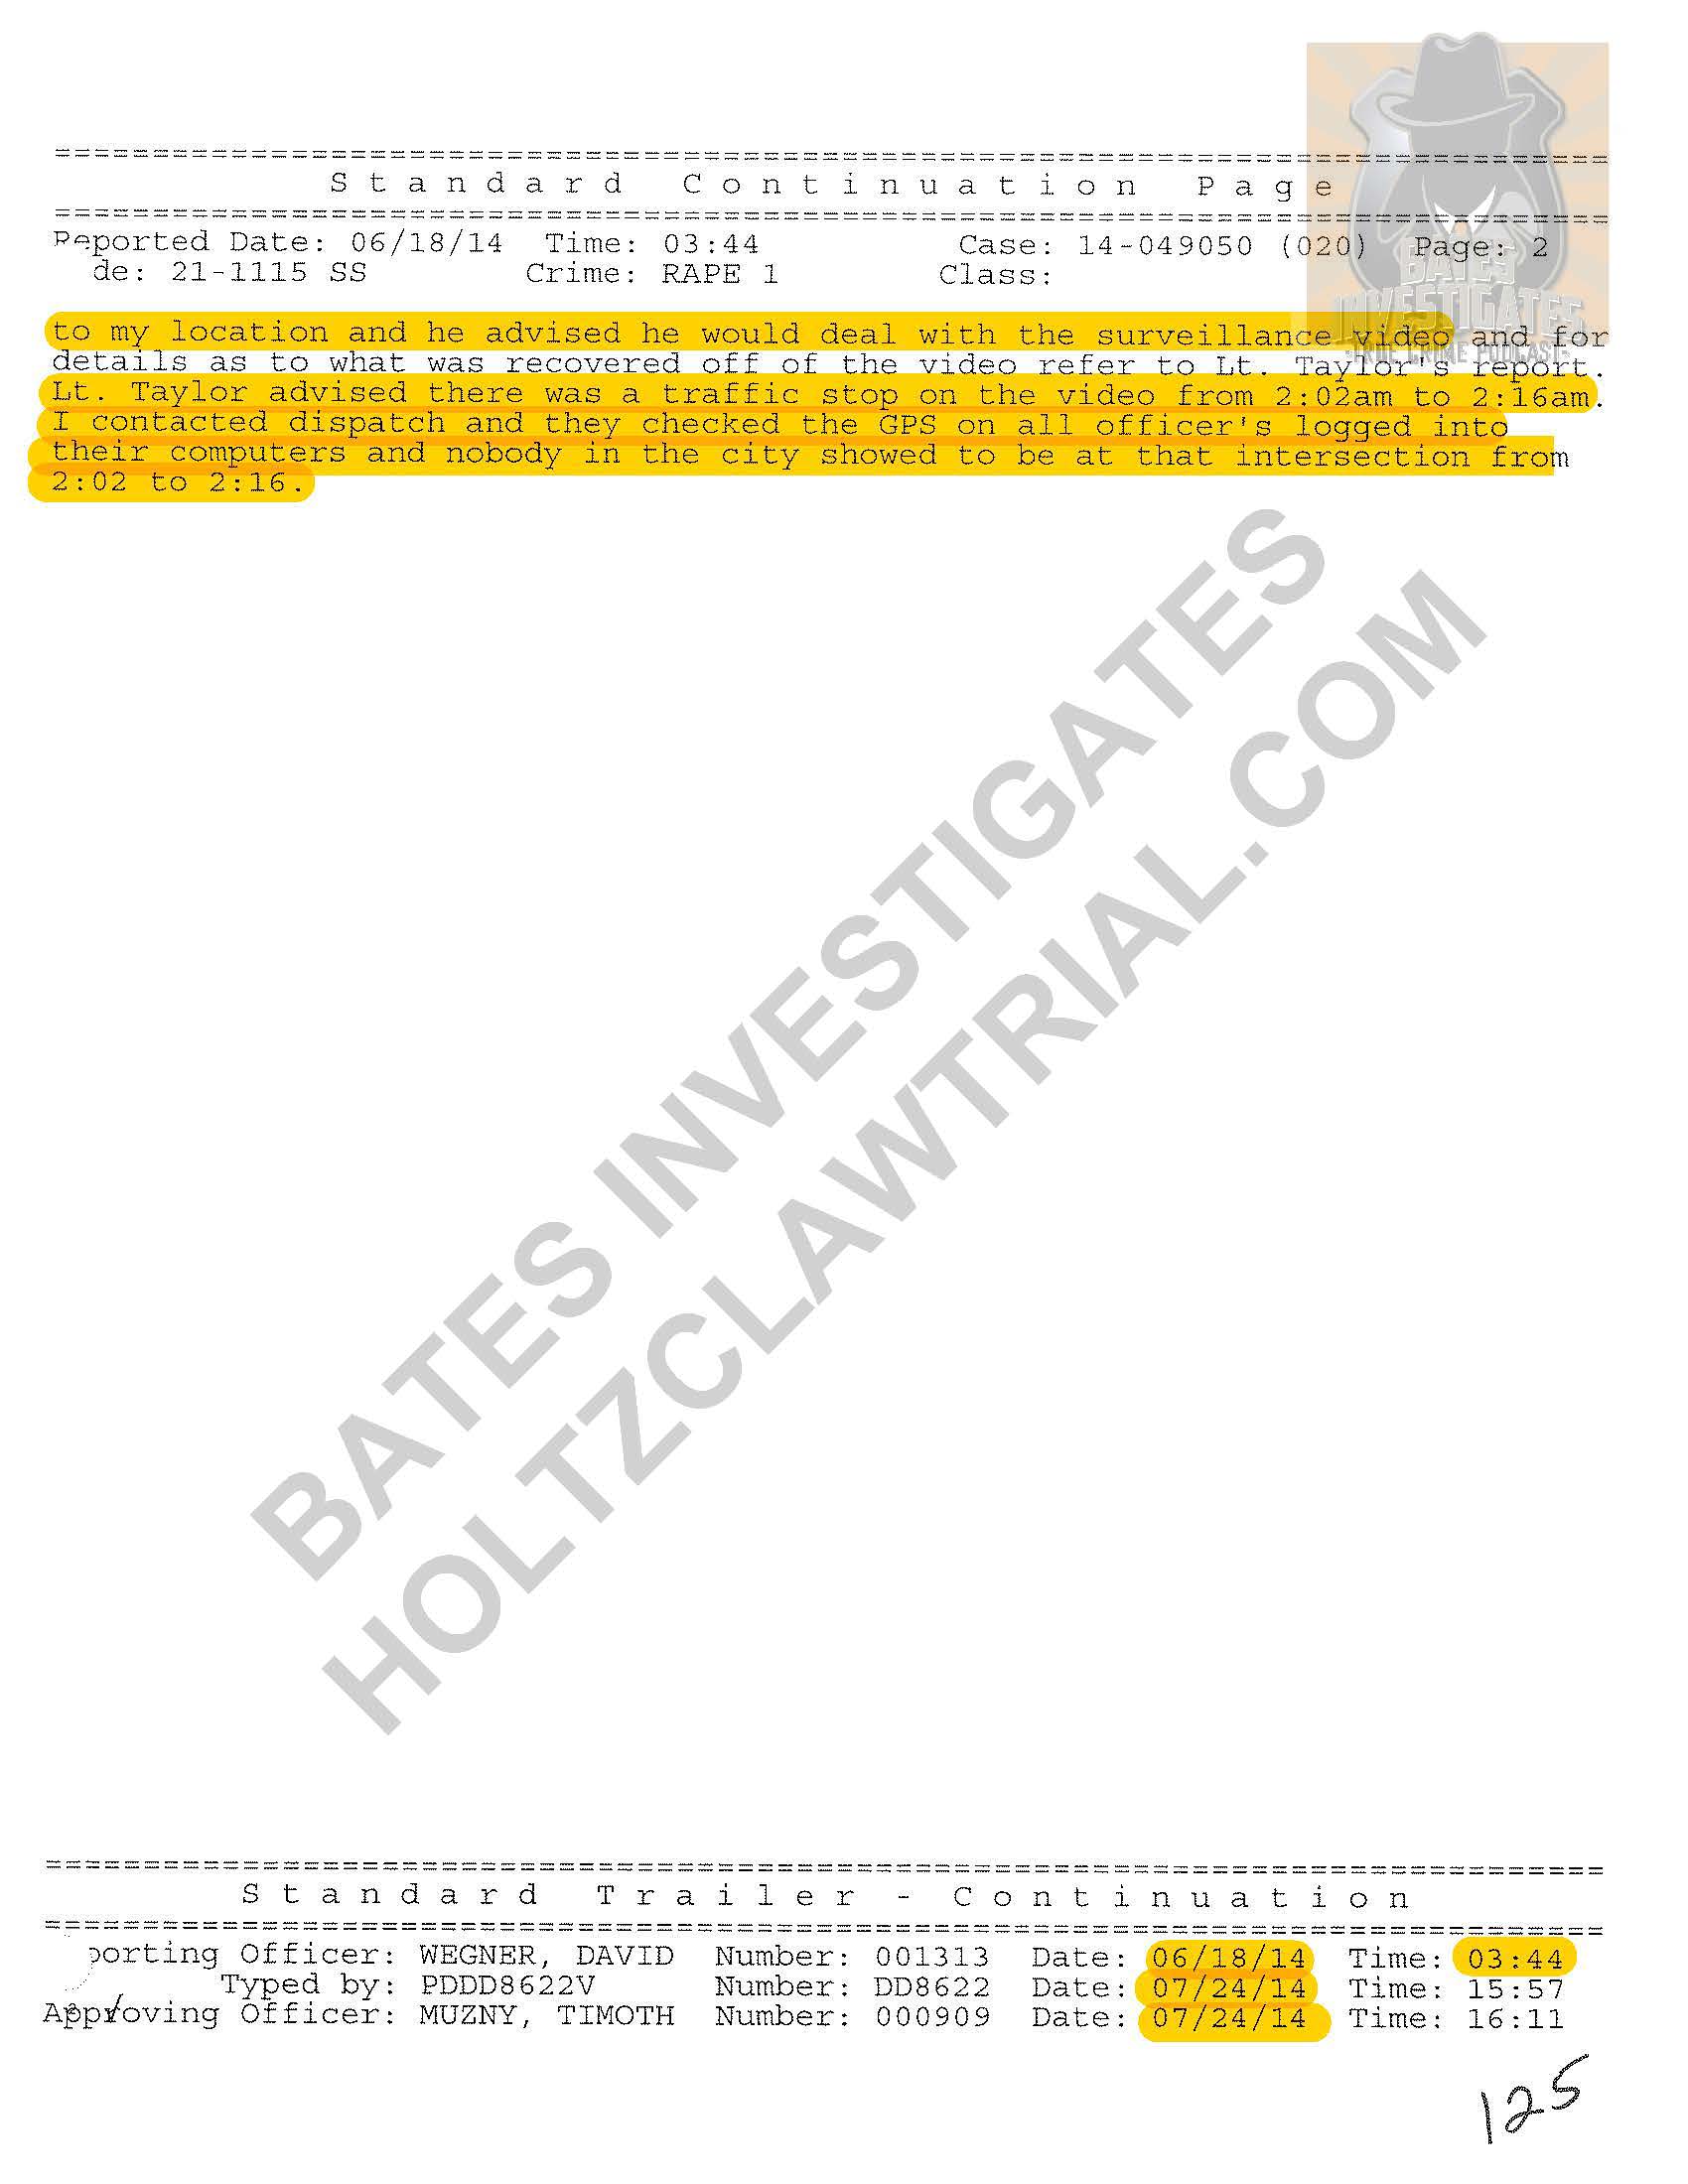 Holtzclaw - Ep02 - Police Reports Watermarked_Page_11.jpg